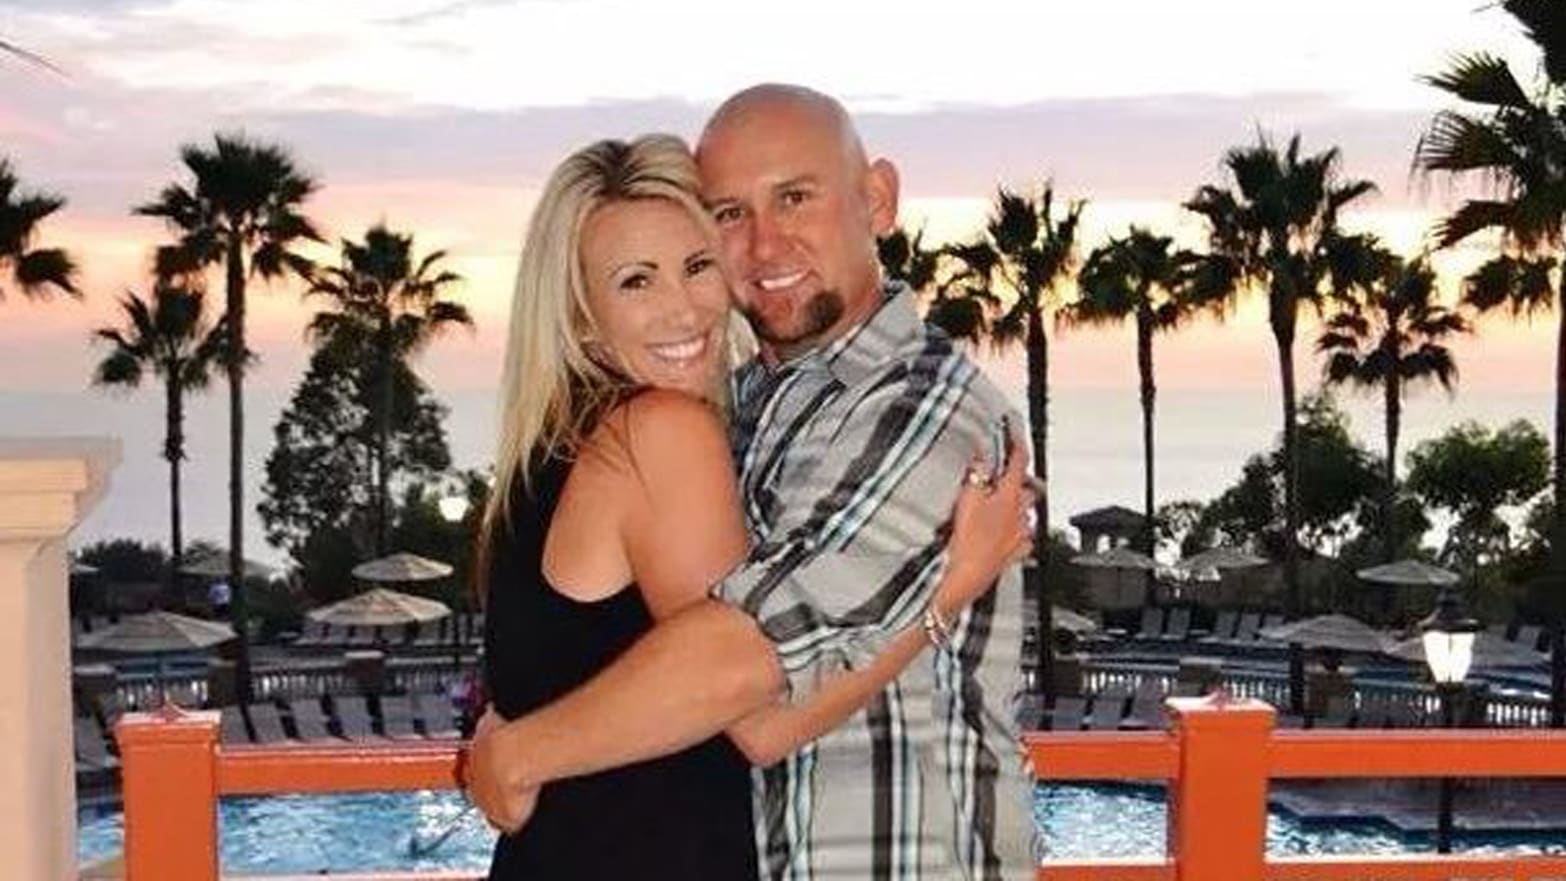 California Mom Sabrina Limon Found Guilty in Brutal Murder of Swinger Hubby image